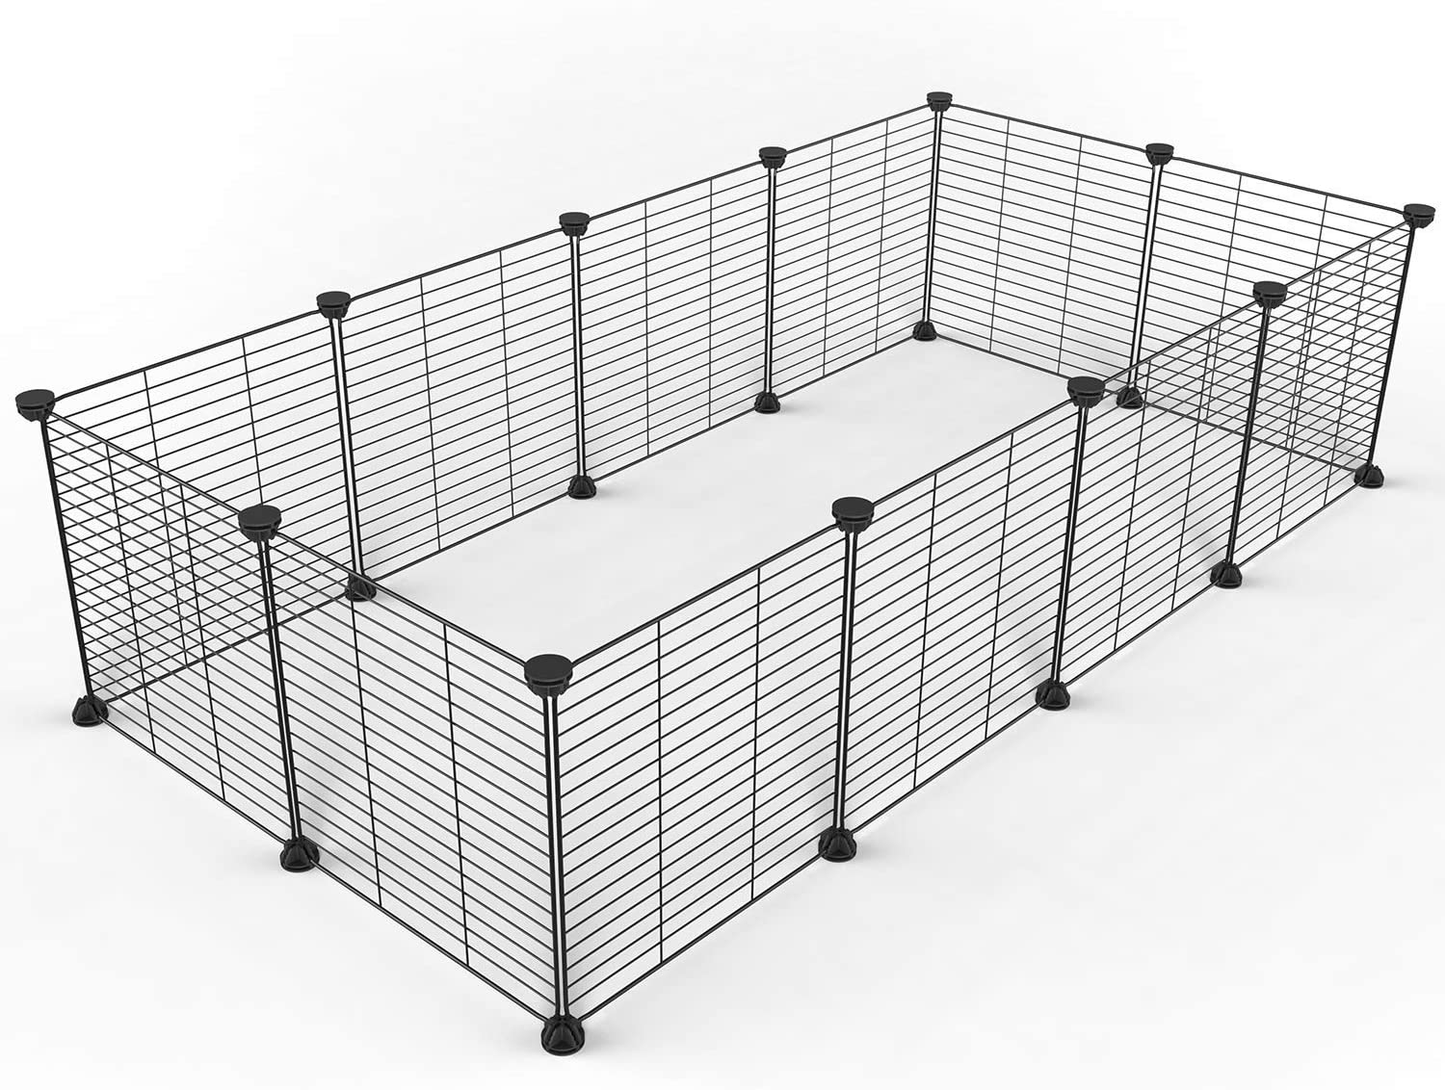 Tespo Pet Playpen, Small Animal Cage Indoor Portable Metal Wire Yd Fence for Small Animals, Guinea Pigs, Rabbits Kennel Crate Fence Tent 15 X 12 Inch